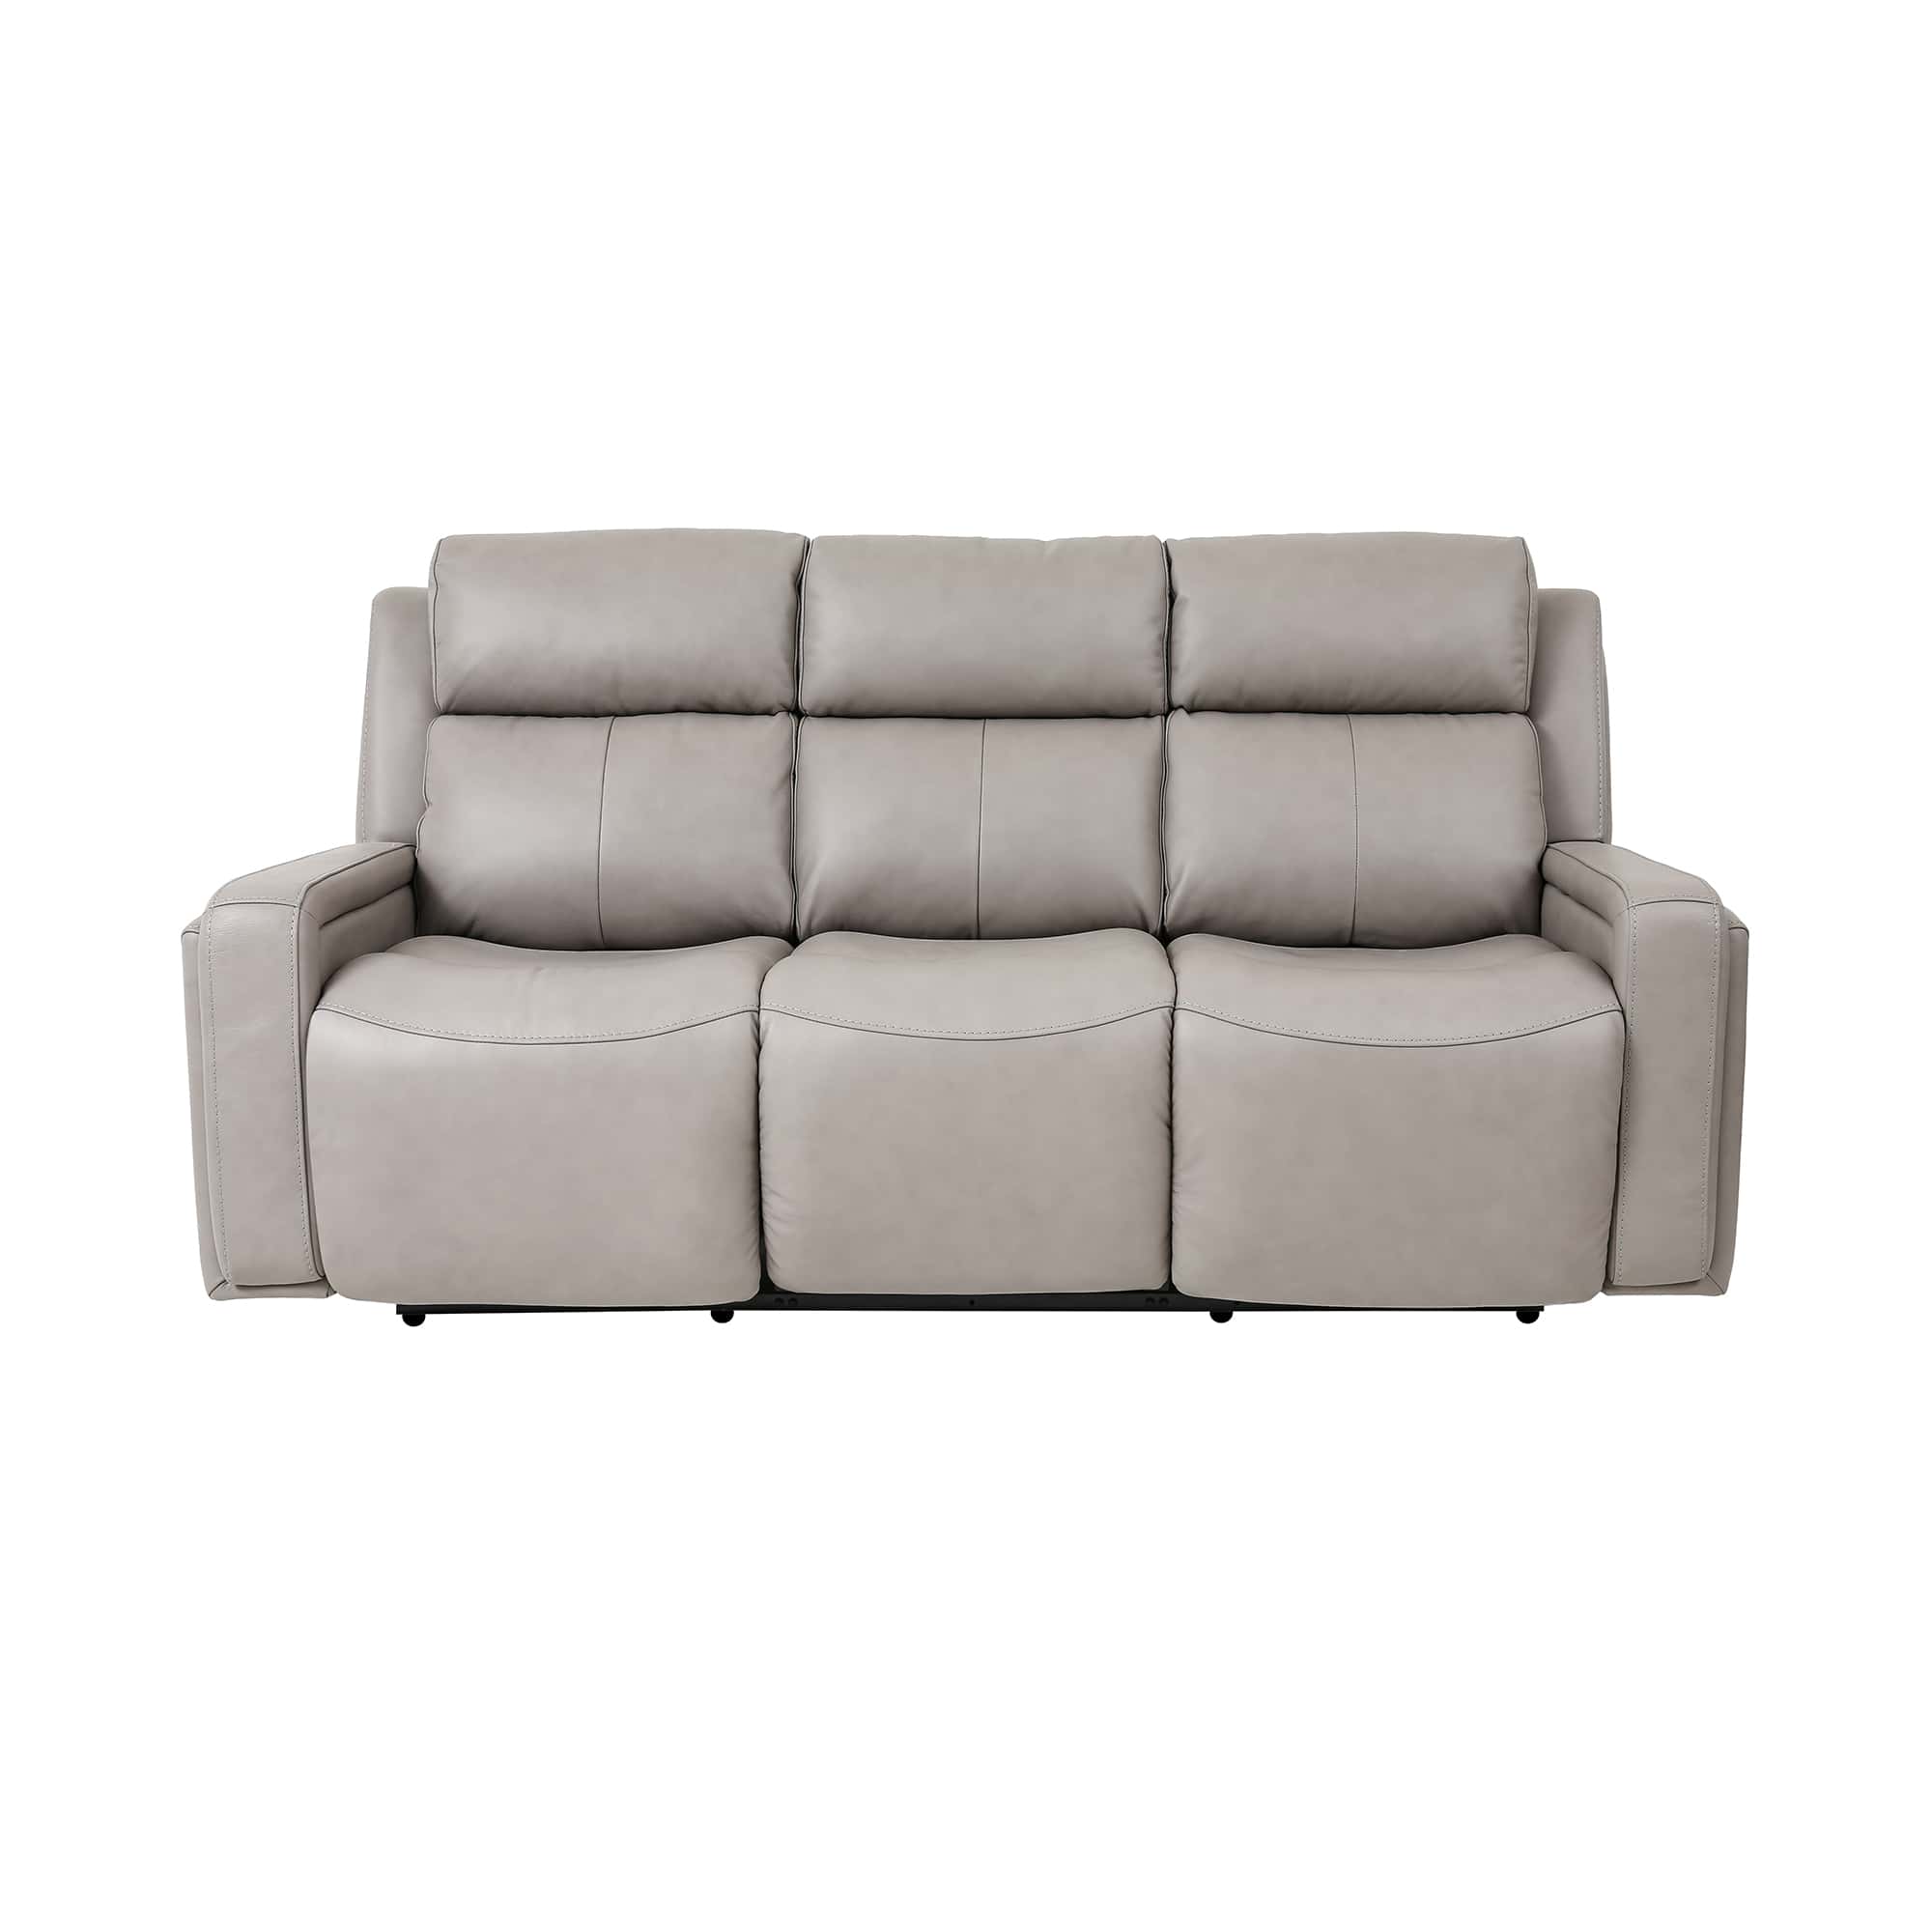 Armen Living Claude Dual Power Headrest and Lumbar Support Reclining Sofa in Light Grey Genuine Leather